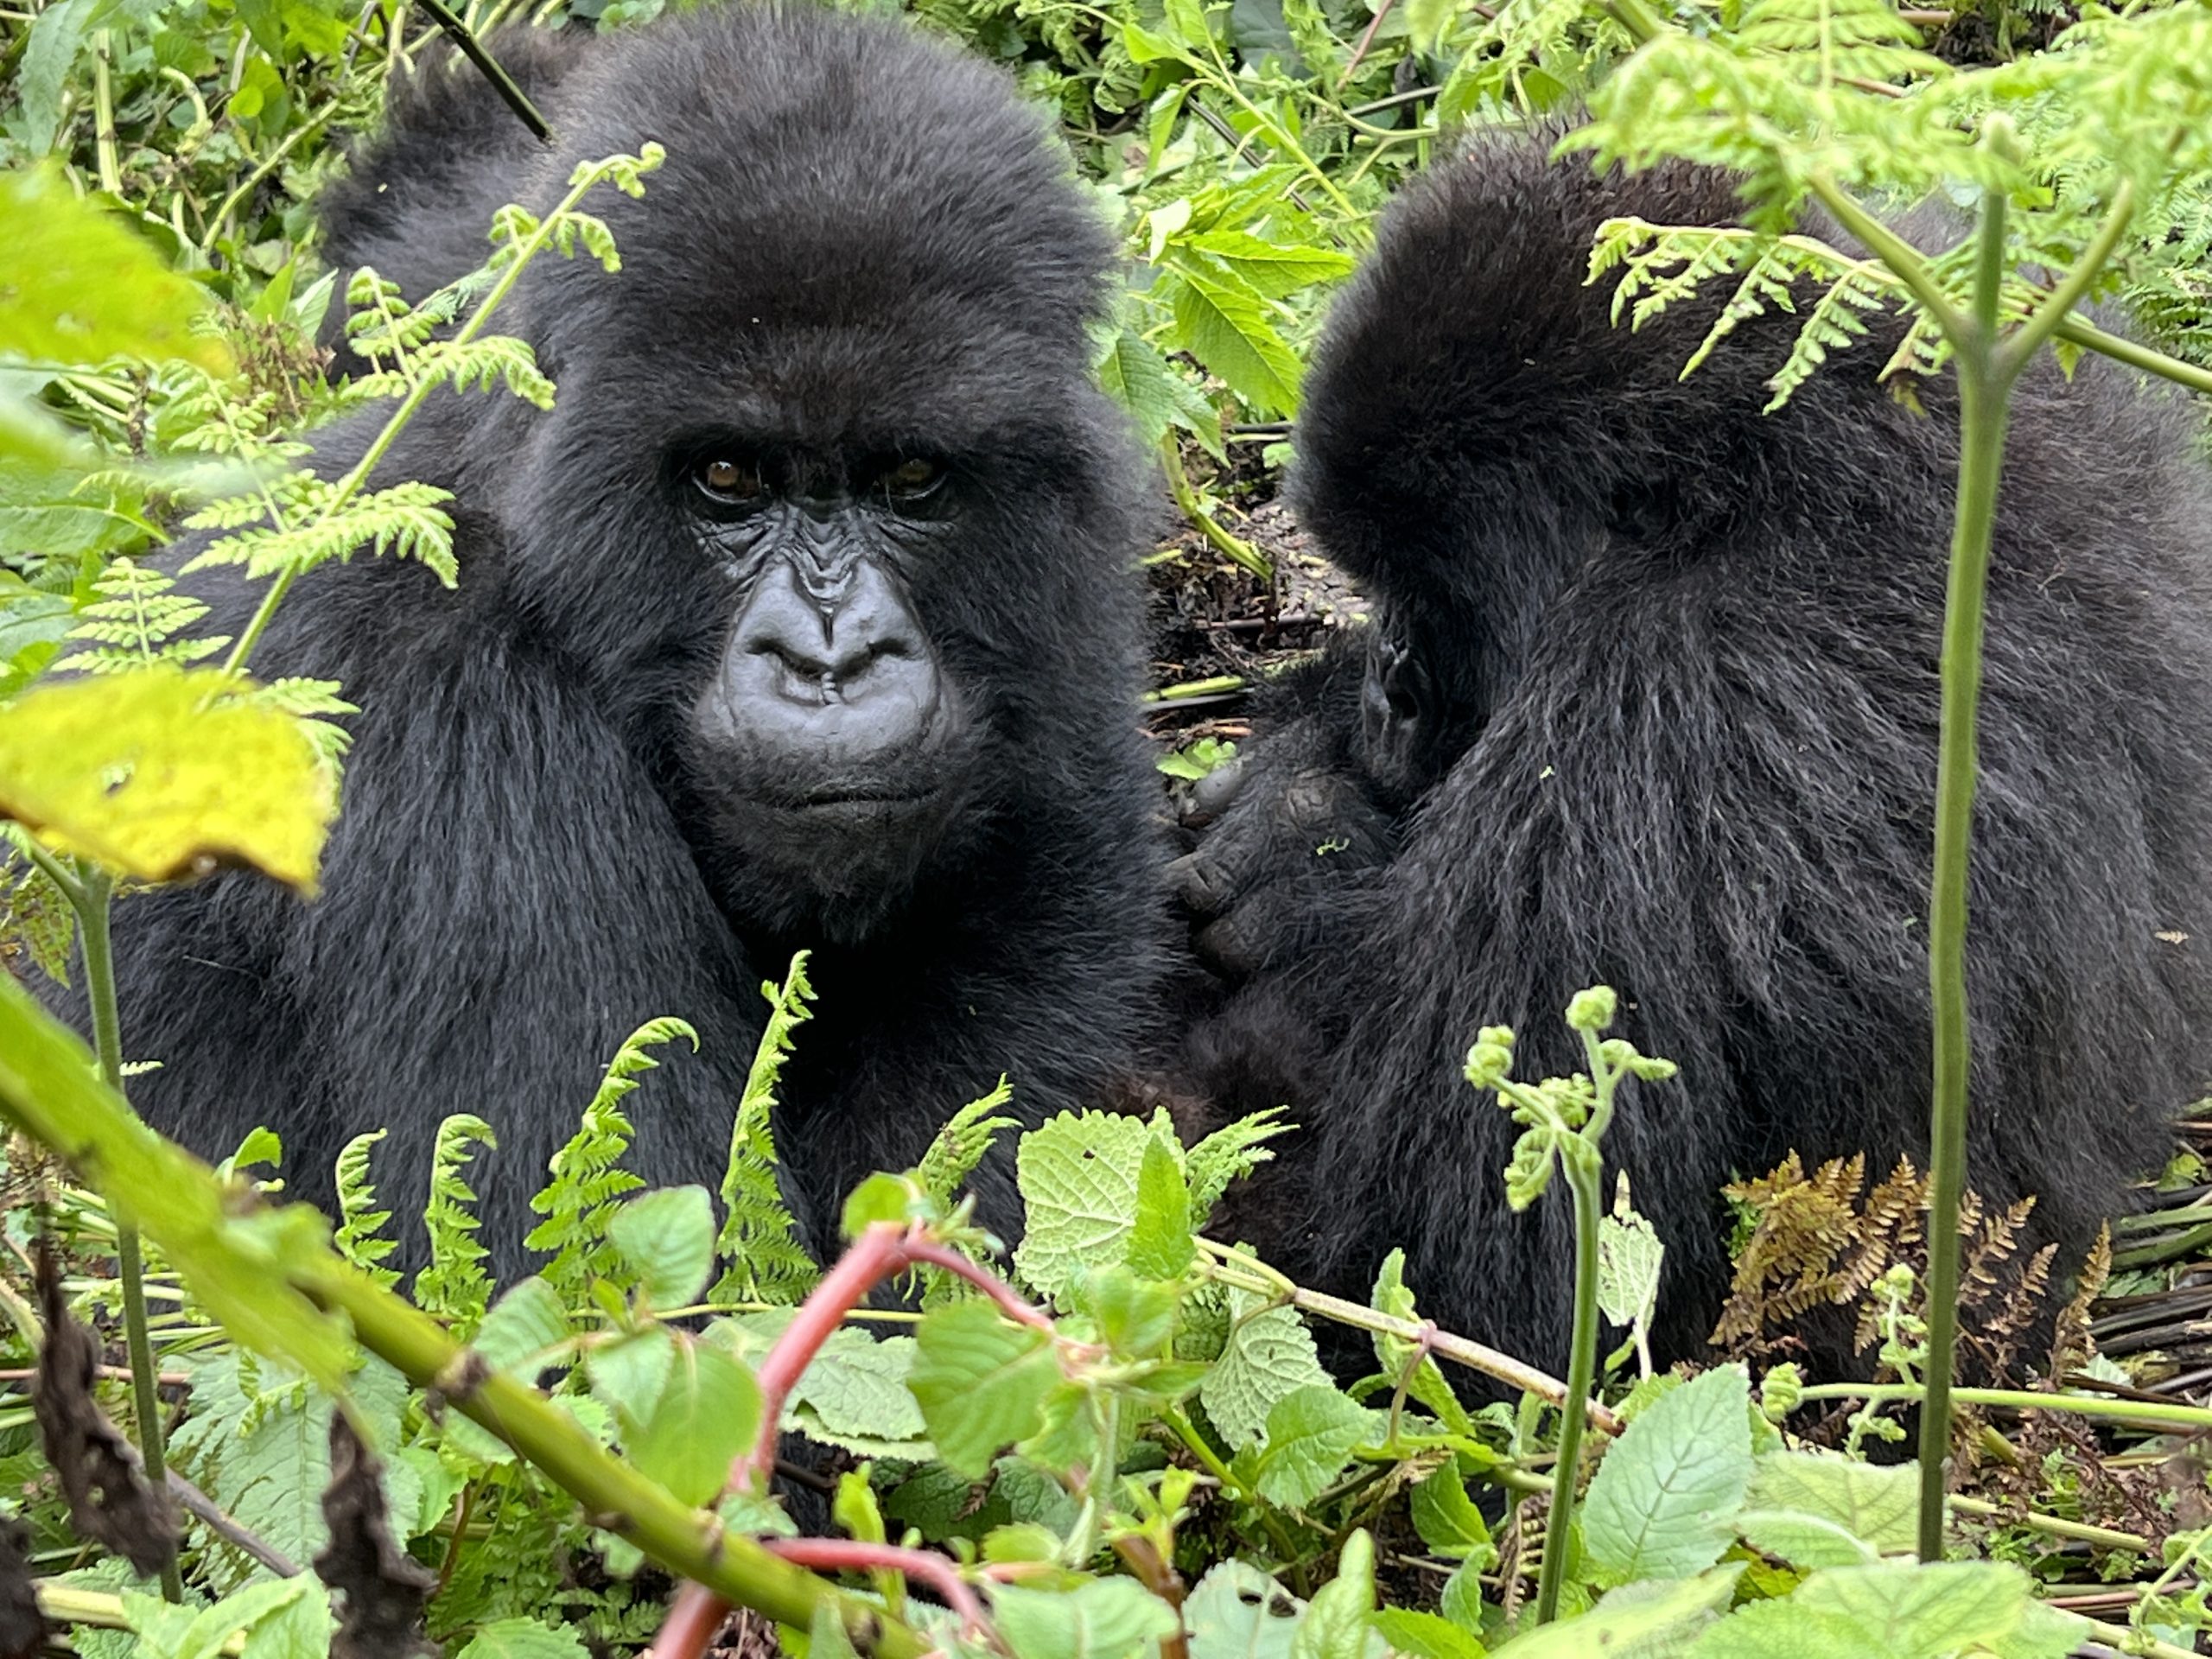 All You Need To Know About Gorilla Trekking in Rwanda